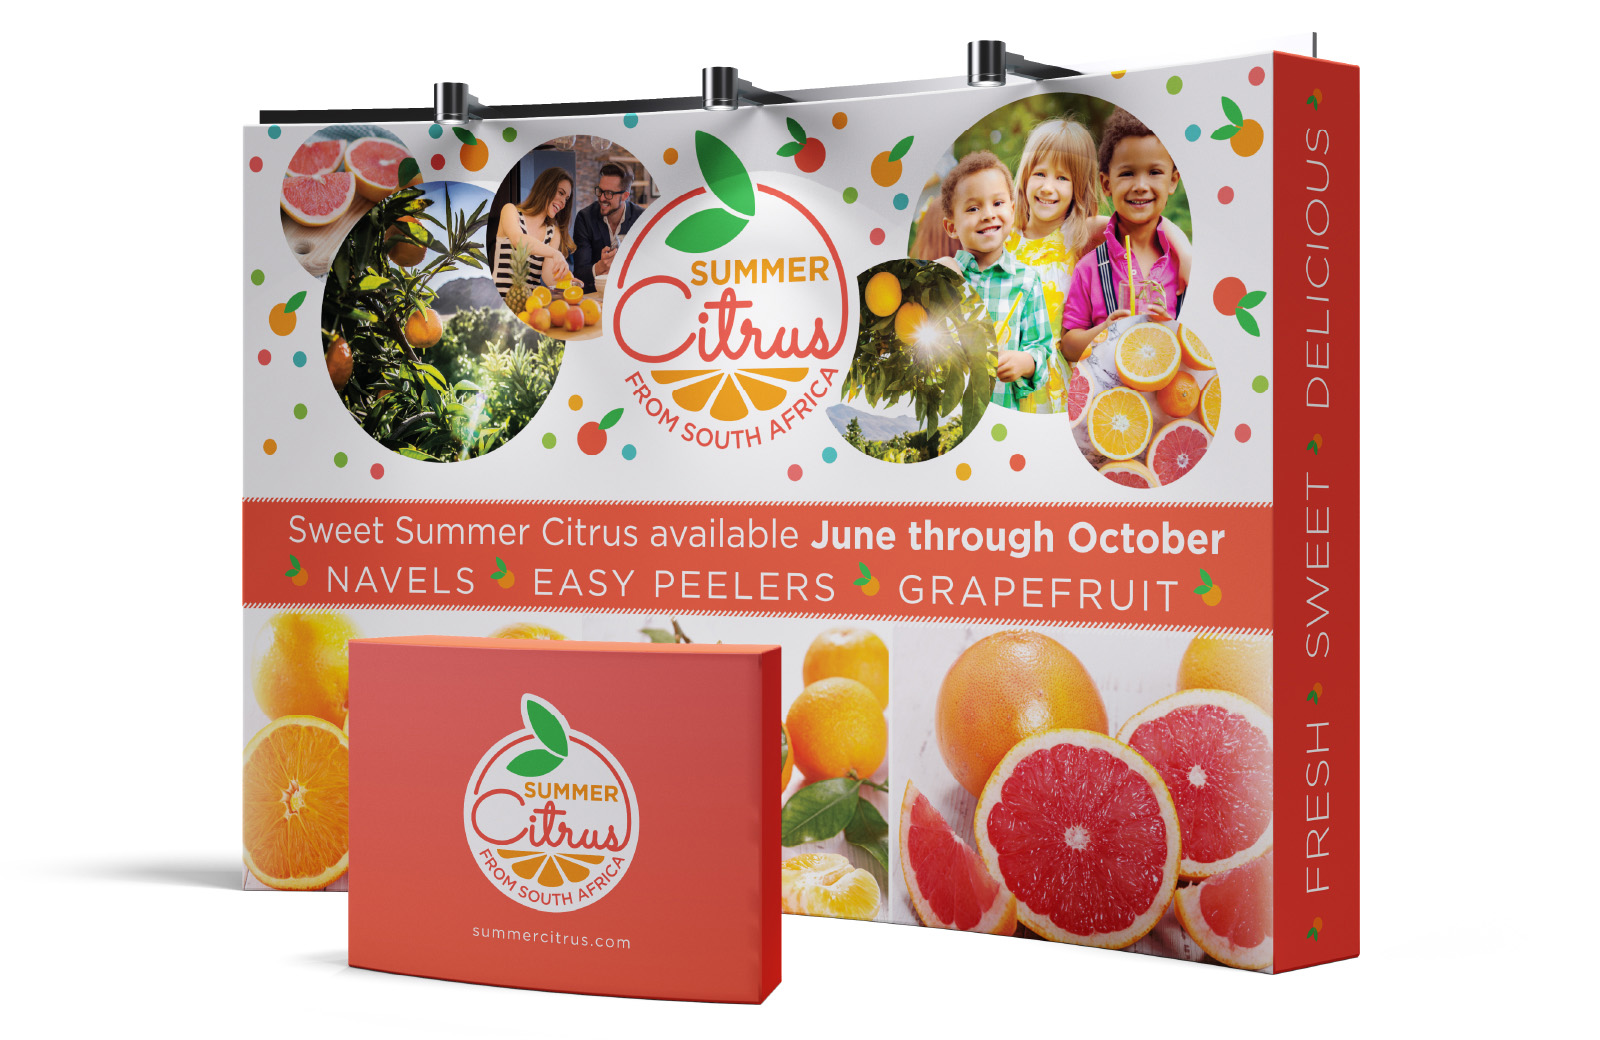 A mock-up of a tradeshow booth with images of Summer Citrus from South Africa products with text that says "Fresh Sweet Delicious" and "Sweet Summer Citrus available June through October Navels Easy Peelers Grapefruit"